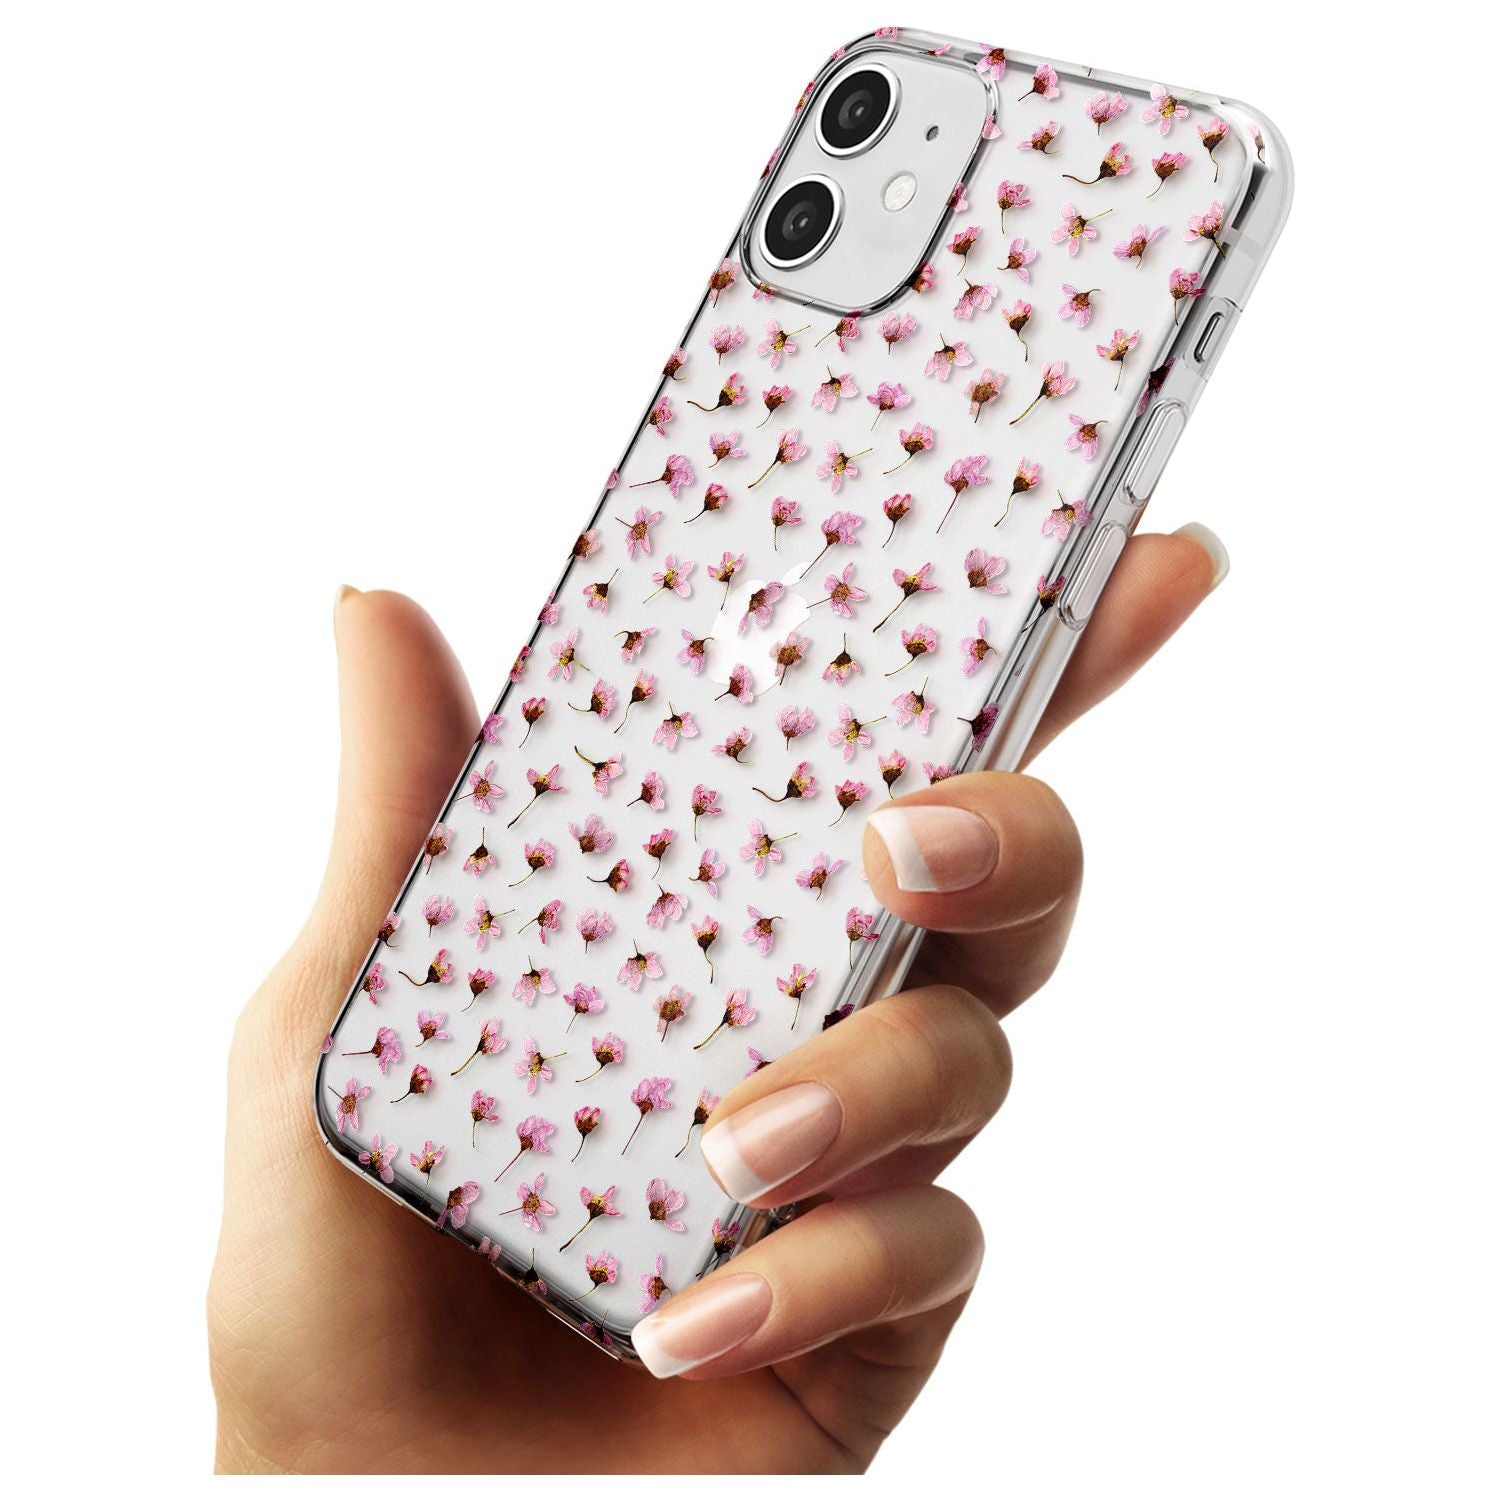 Small Pink Blossoms Transparent Design Slim TPU Phone Case for iPhone 11